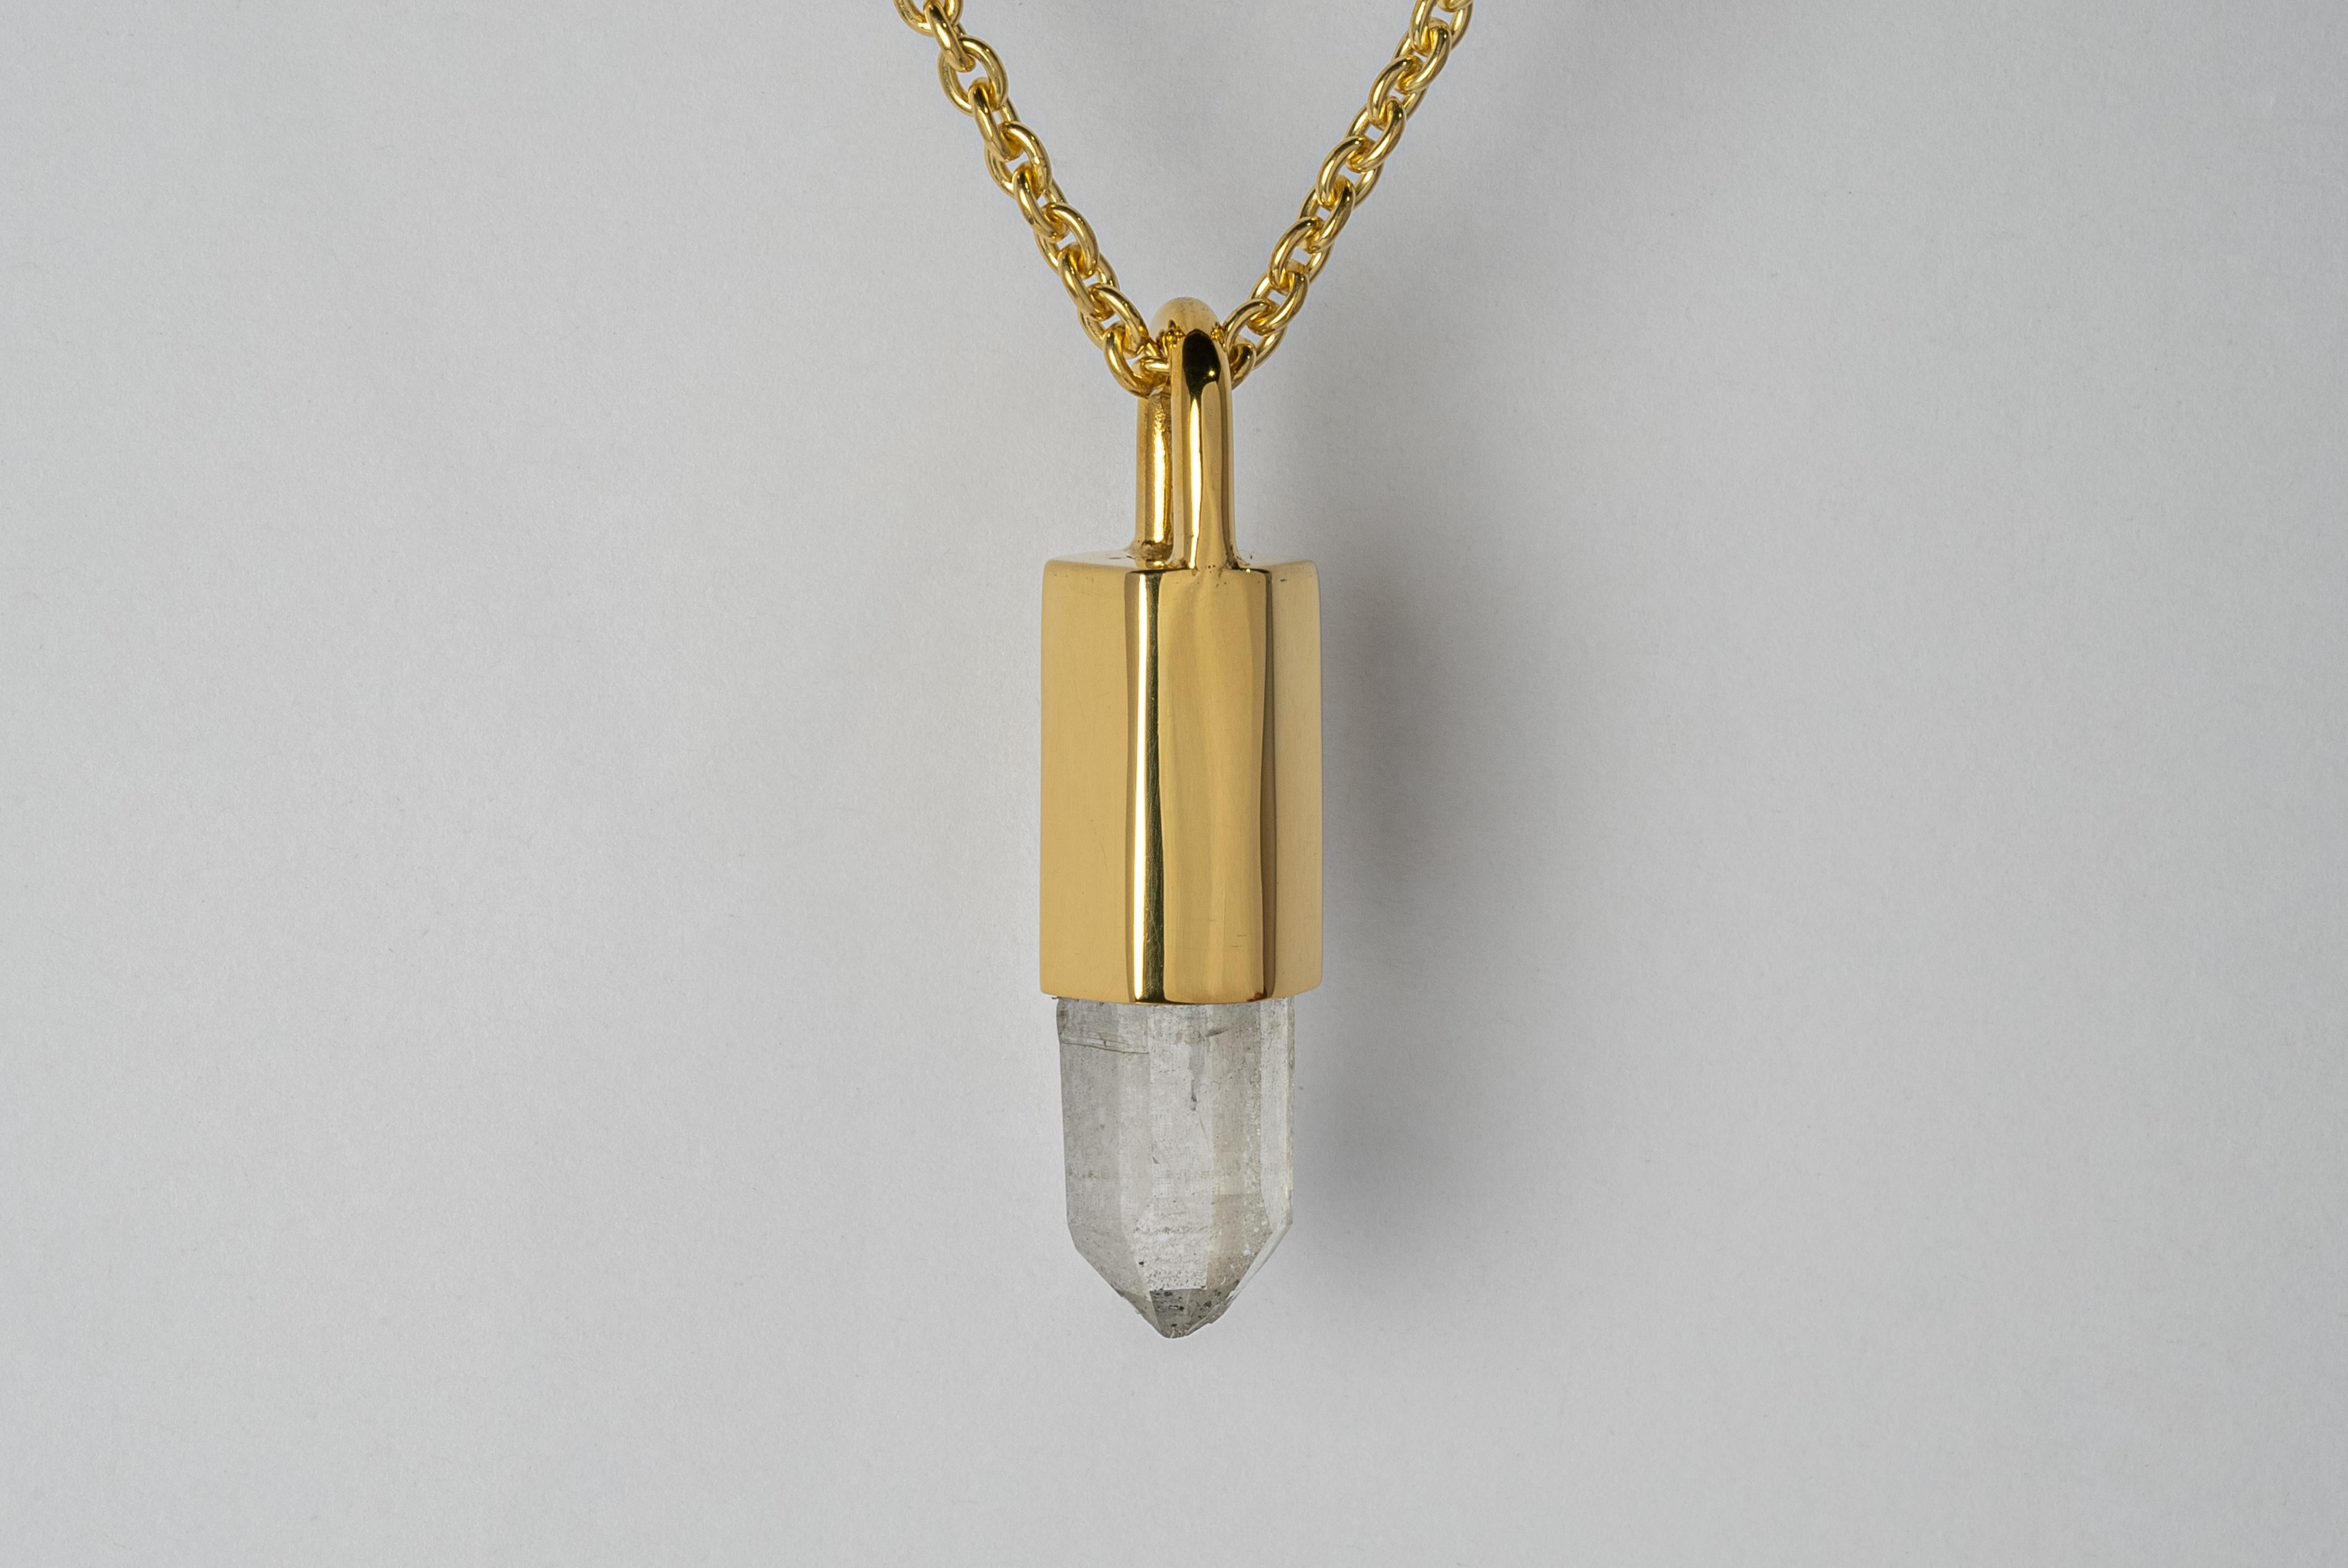 Pendant necklace in brass, sterling silver, and a rough of misc quartz. Brass and sterling silver are substrates, polished, and electroplated with 18k gold and then dipped into acid to create the subtly destroyed surface.
The Talisman series is an